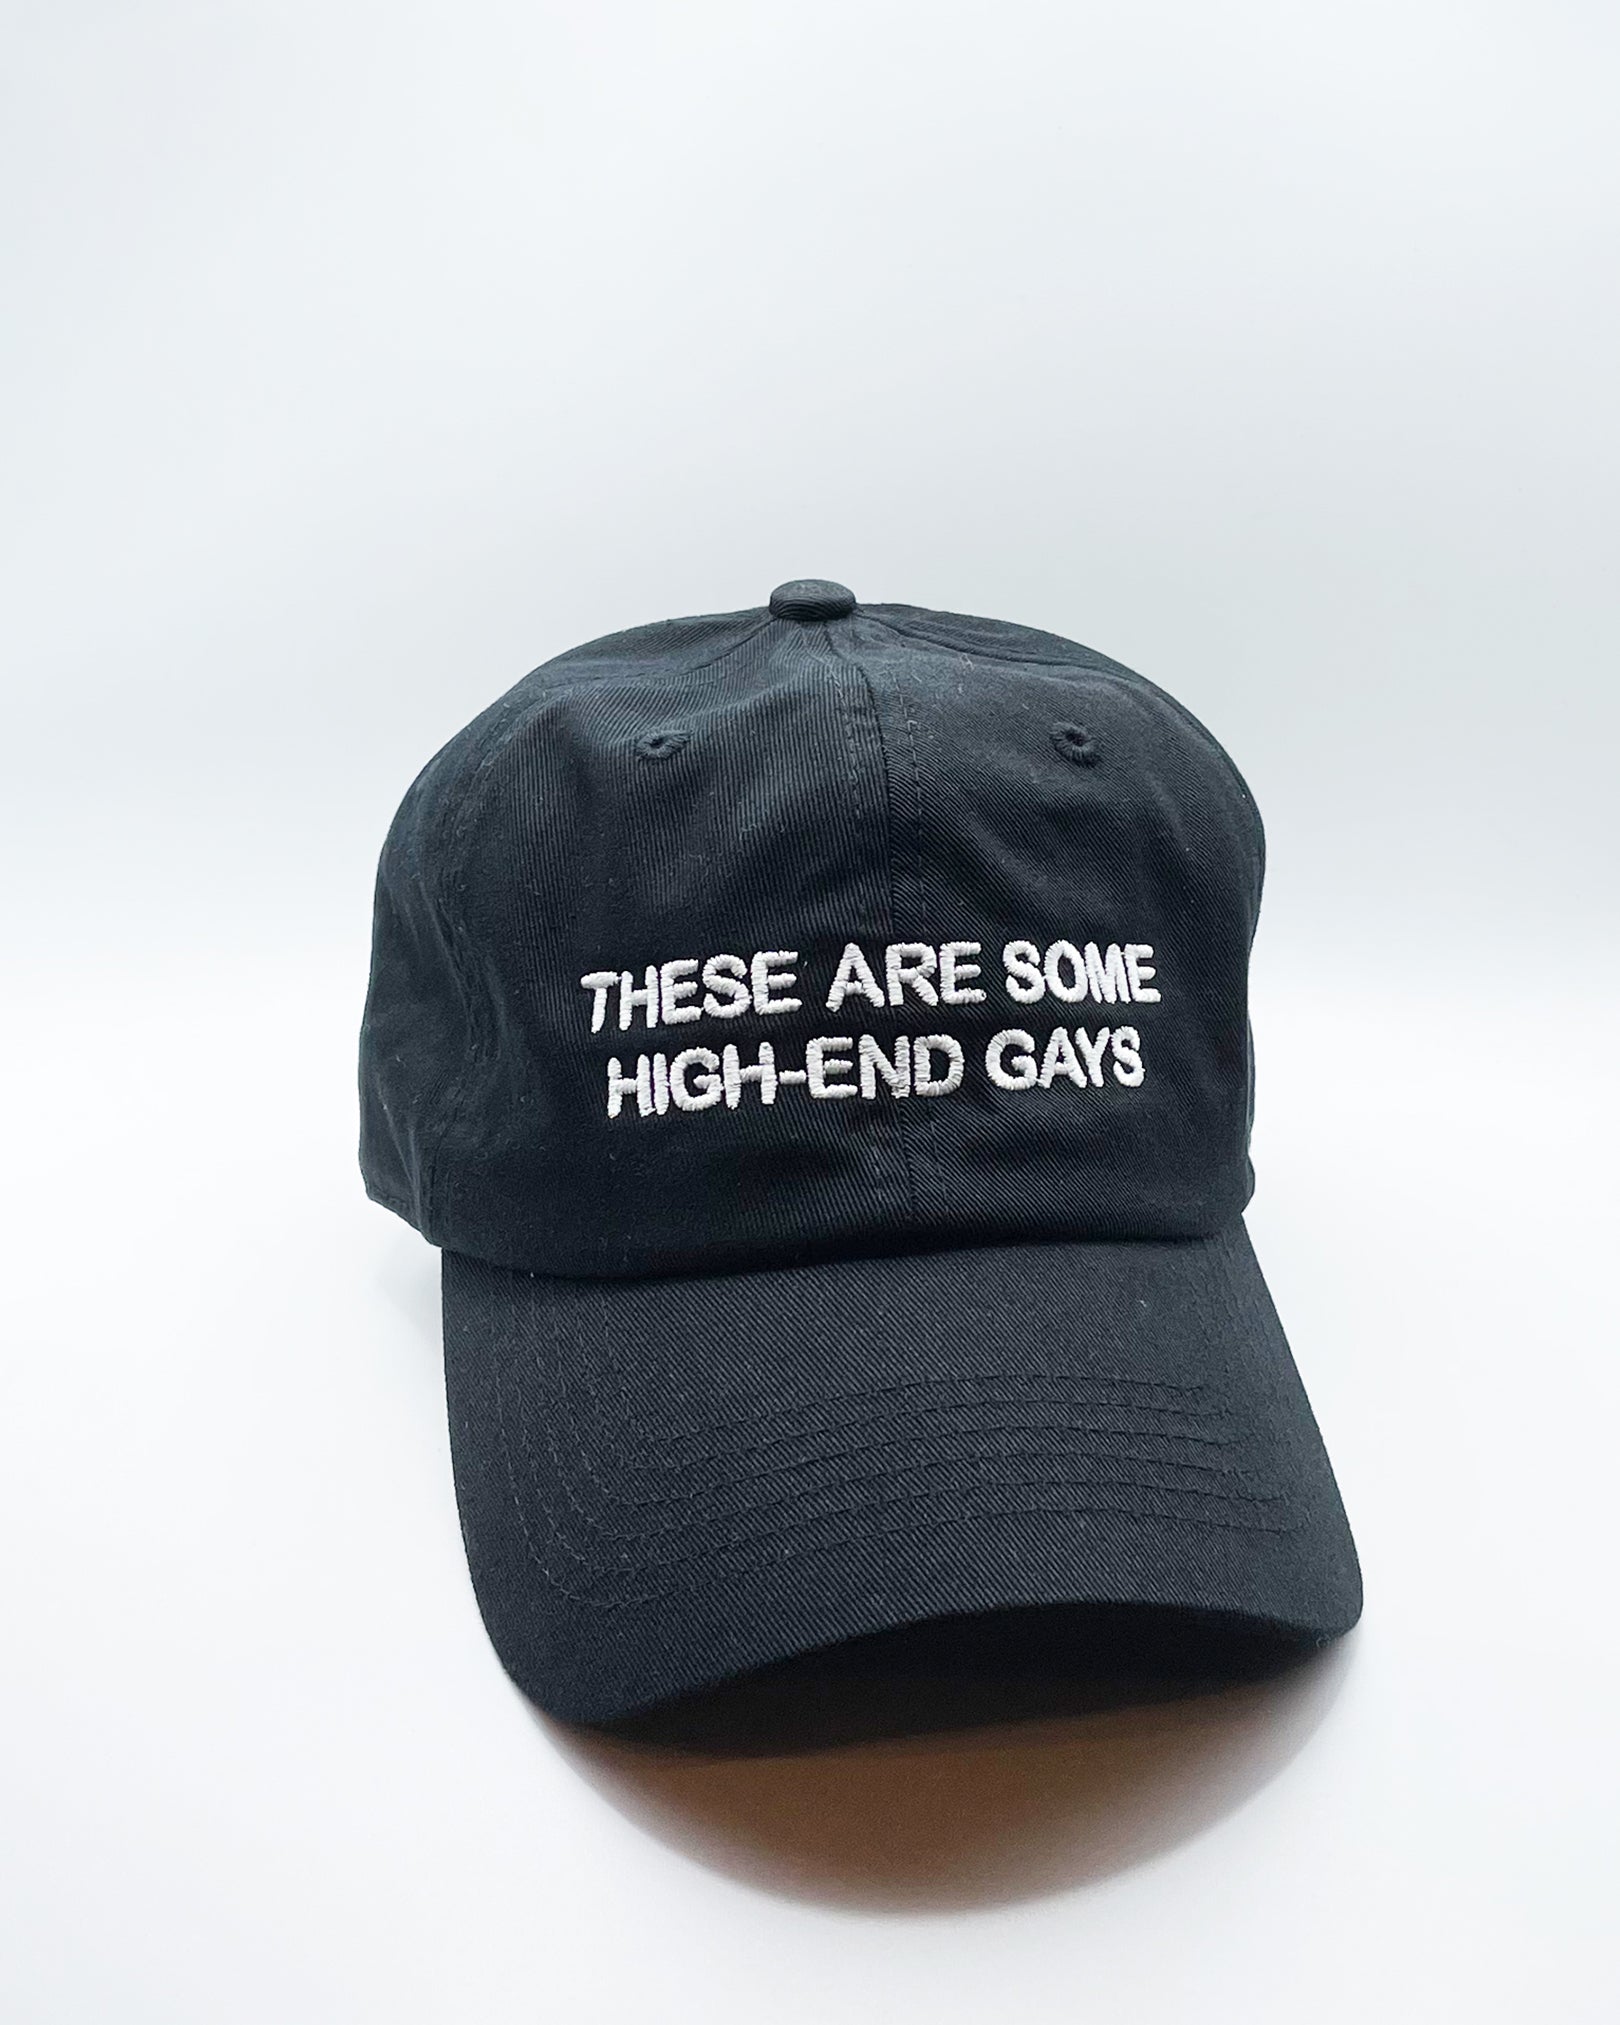 INTENTIONALLY BLANK Slogan Cap in "High End Gays" available at Lahn.shop